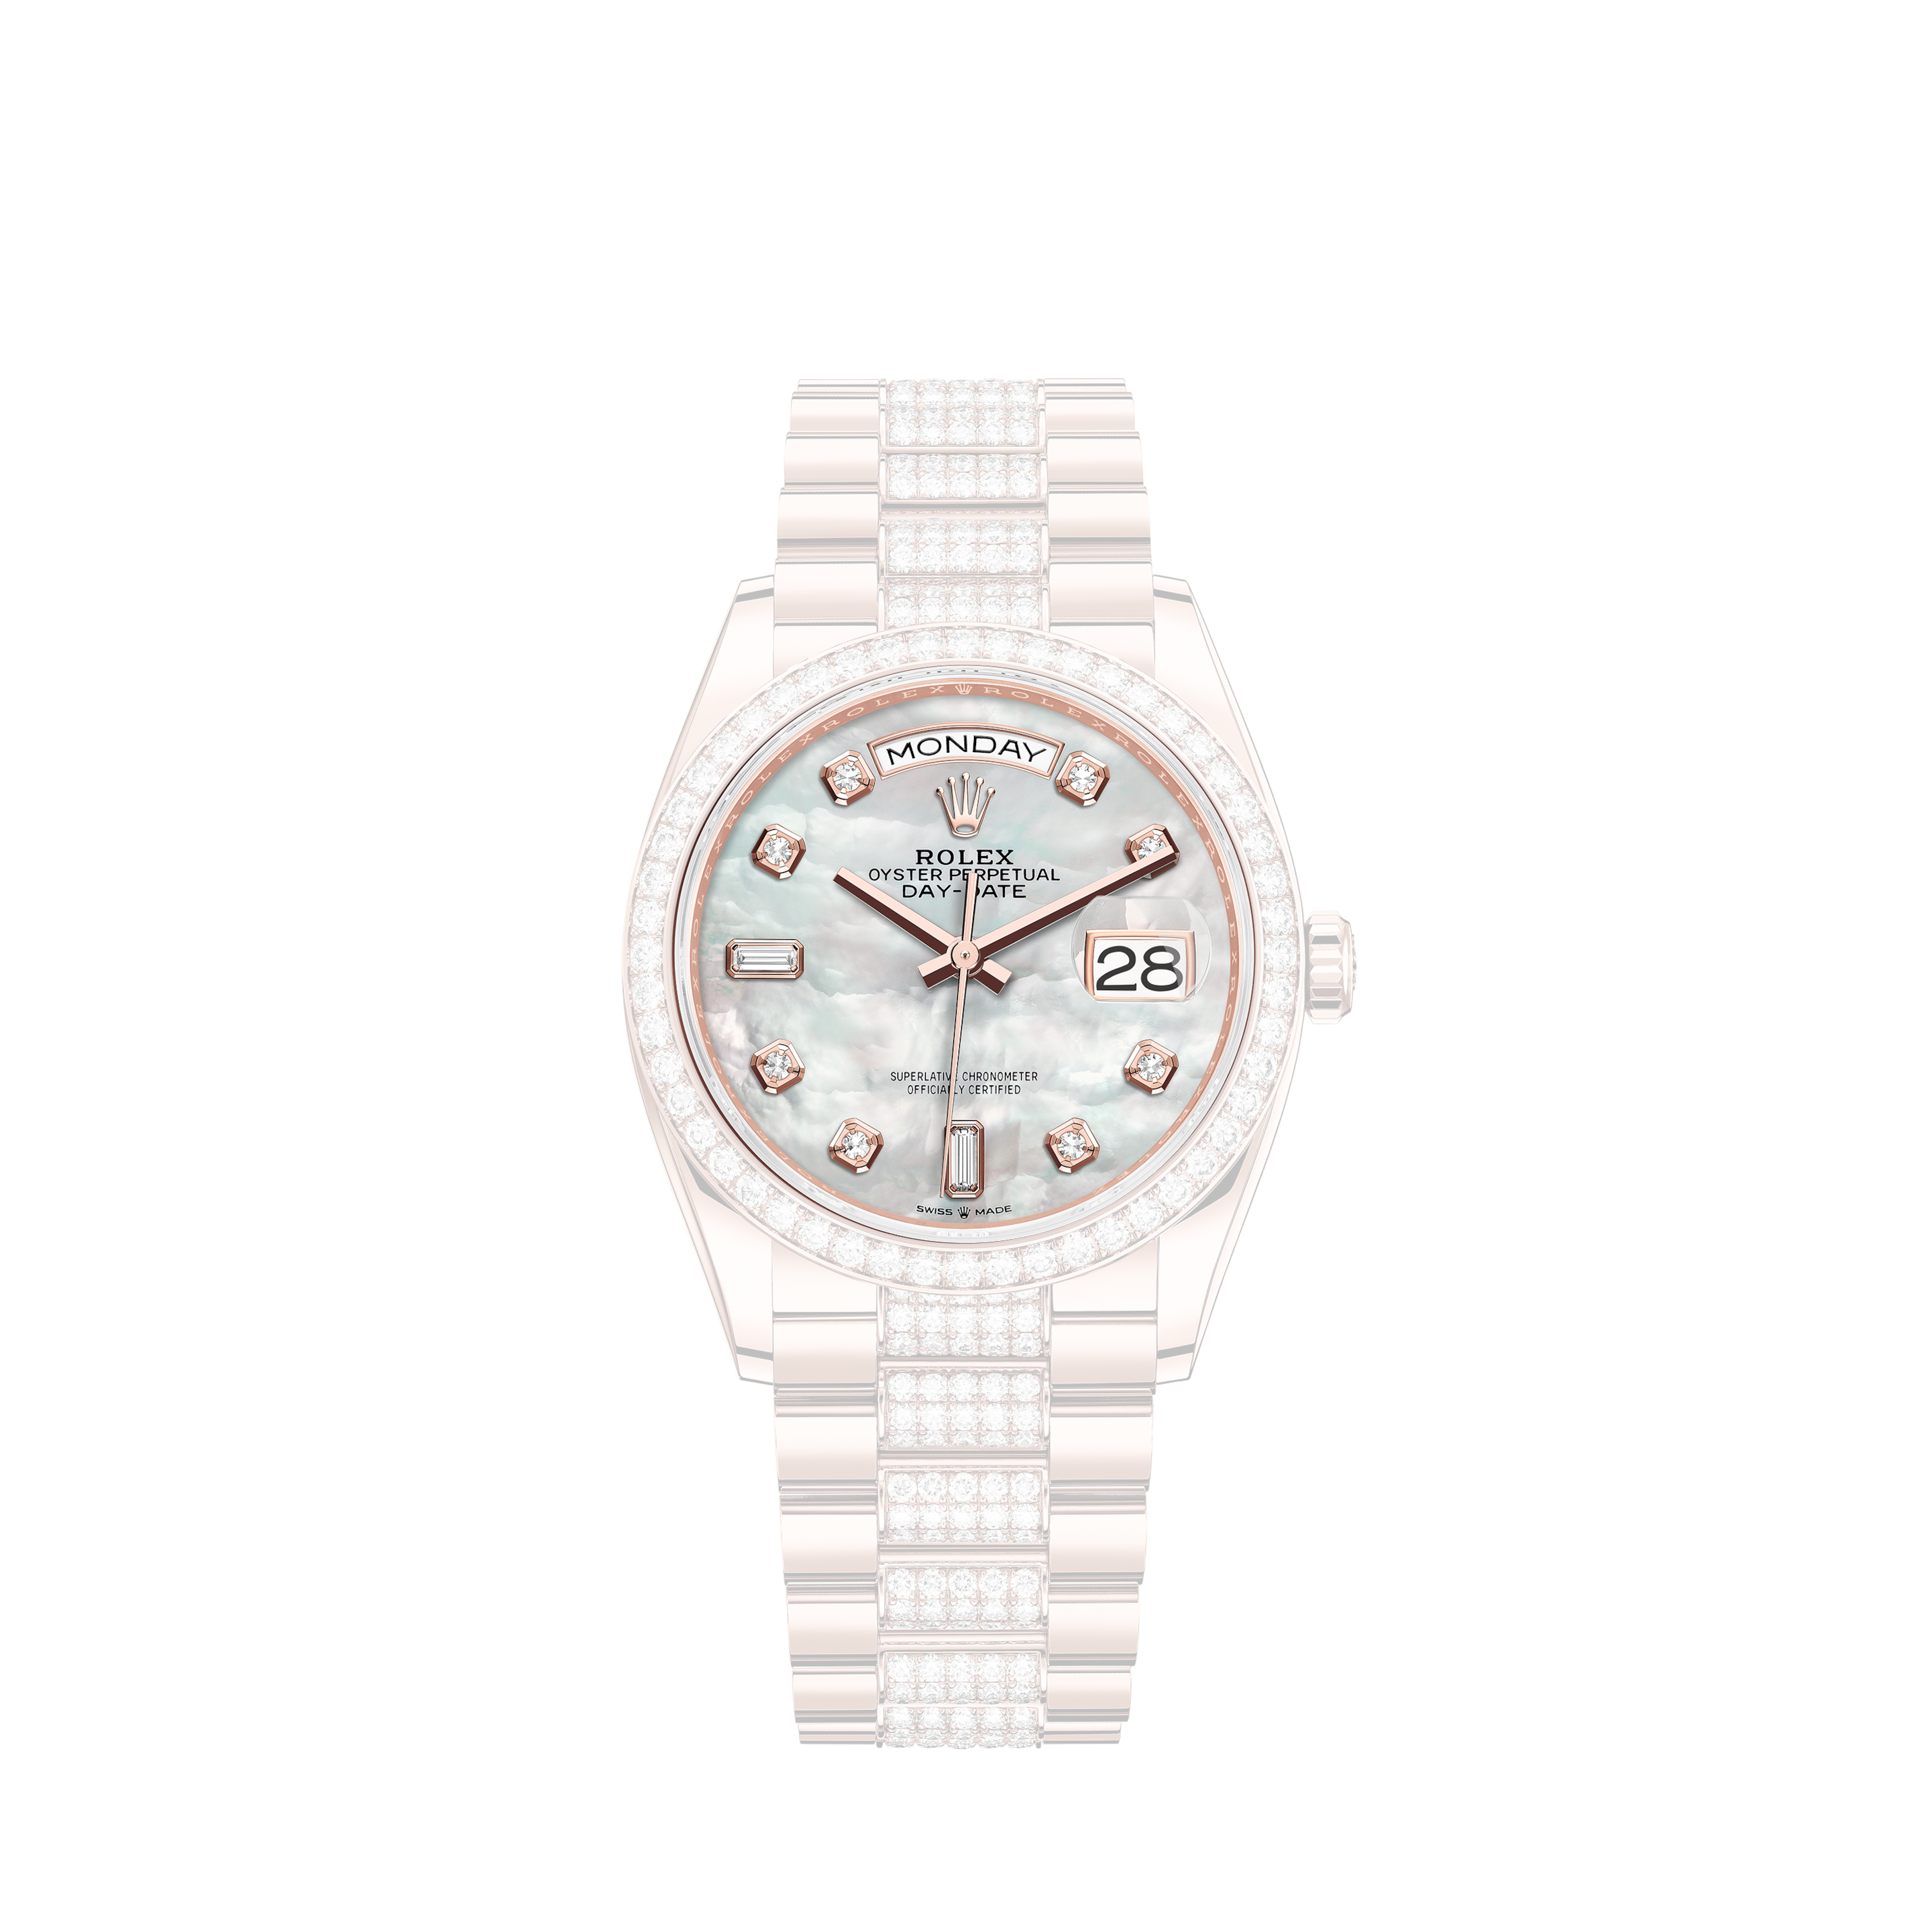 Rolex Oyster Perpetual 36mm Datejust Diamond Bezel White Mother Of Pearl Dial with Diamond 6 & 9 NumbersRolex Oyster Perpetual 36mm Datejust Diamond Bezel White Mother Of Pearl Dial with Diamond 6 & 9 Numbers 16233